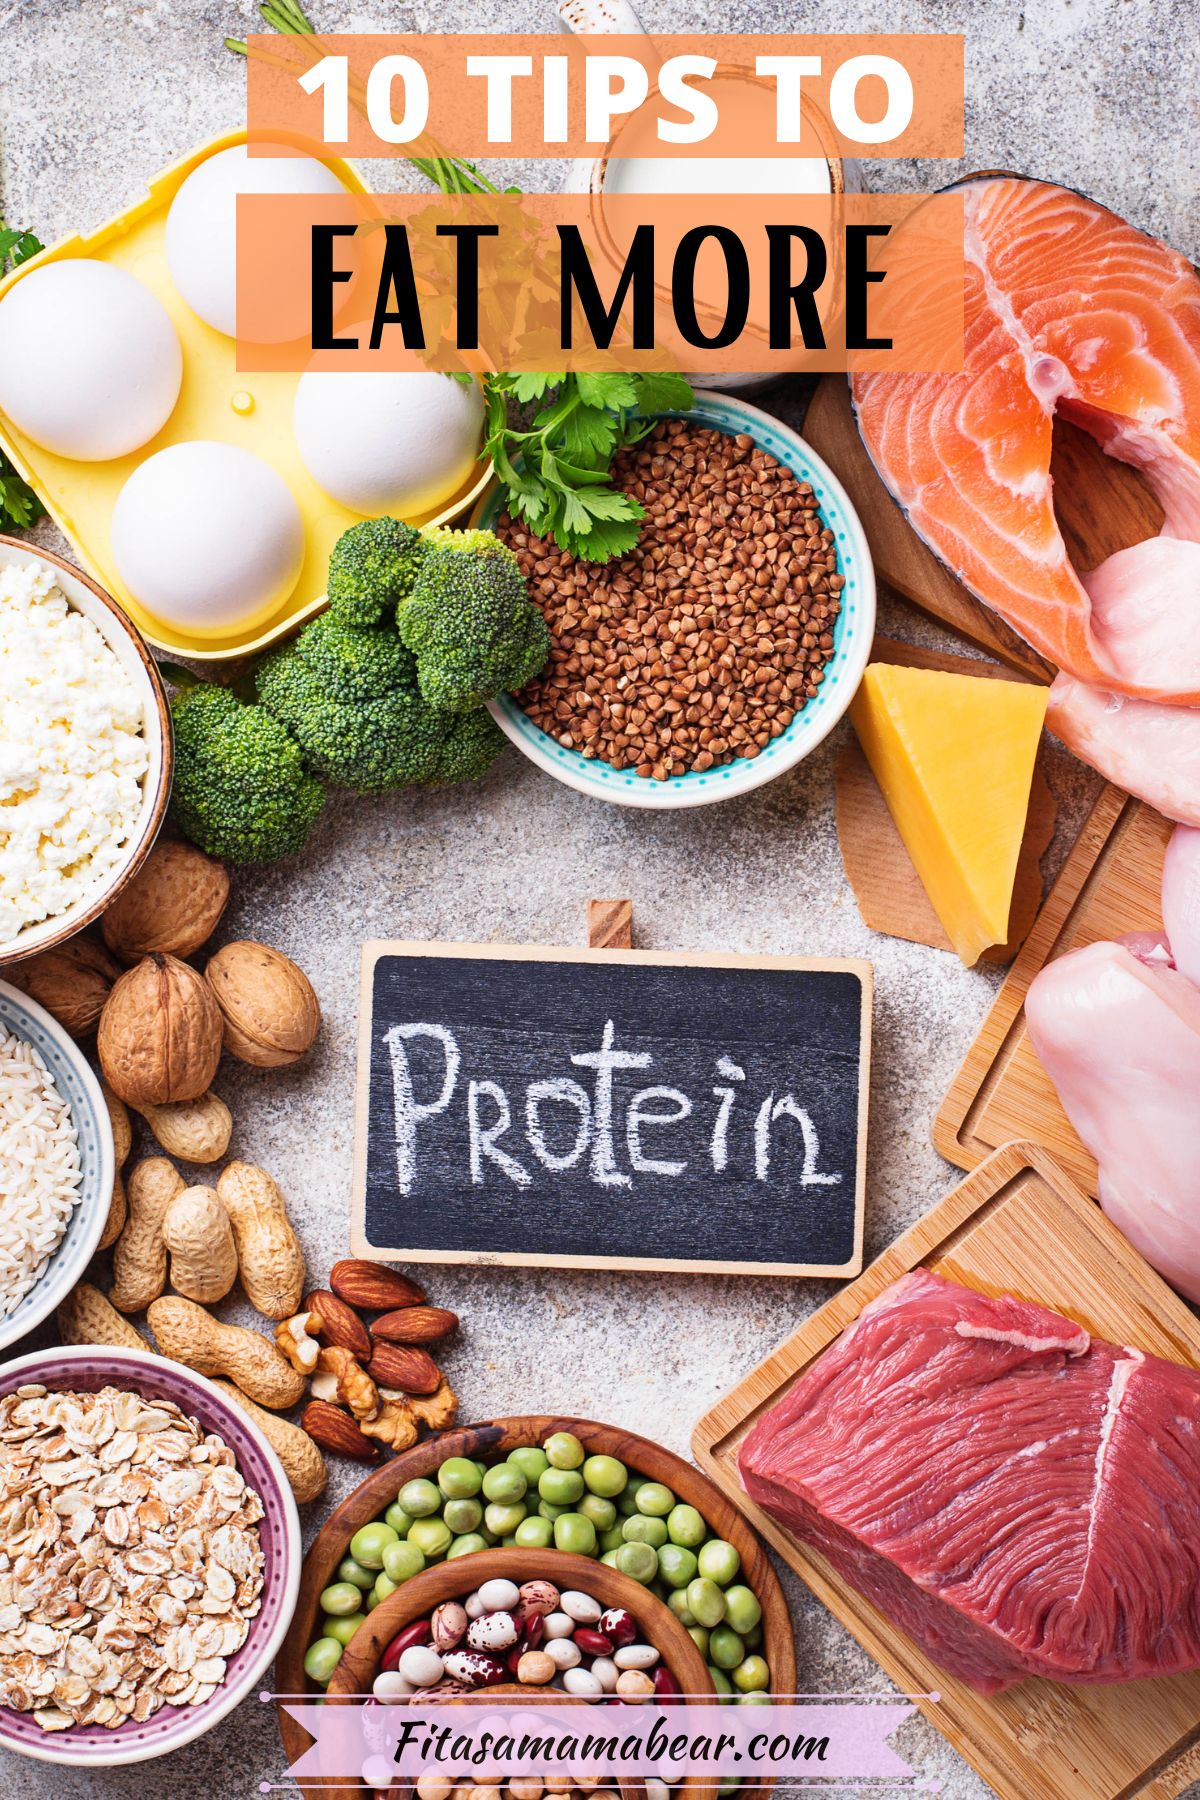 Multiple protein-rich foods like meat, cheese, nuts, and seeds around a chalkboard with the word protein on it.